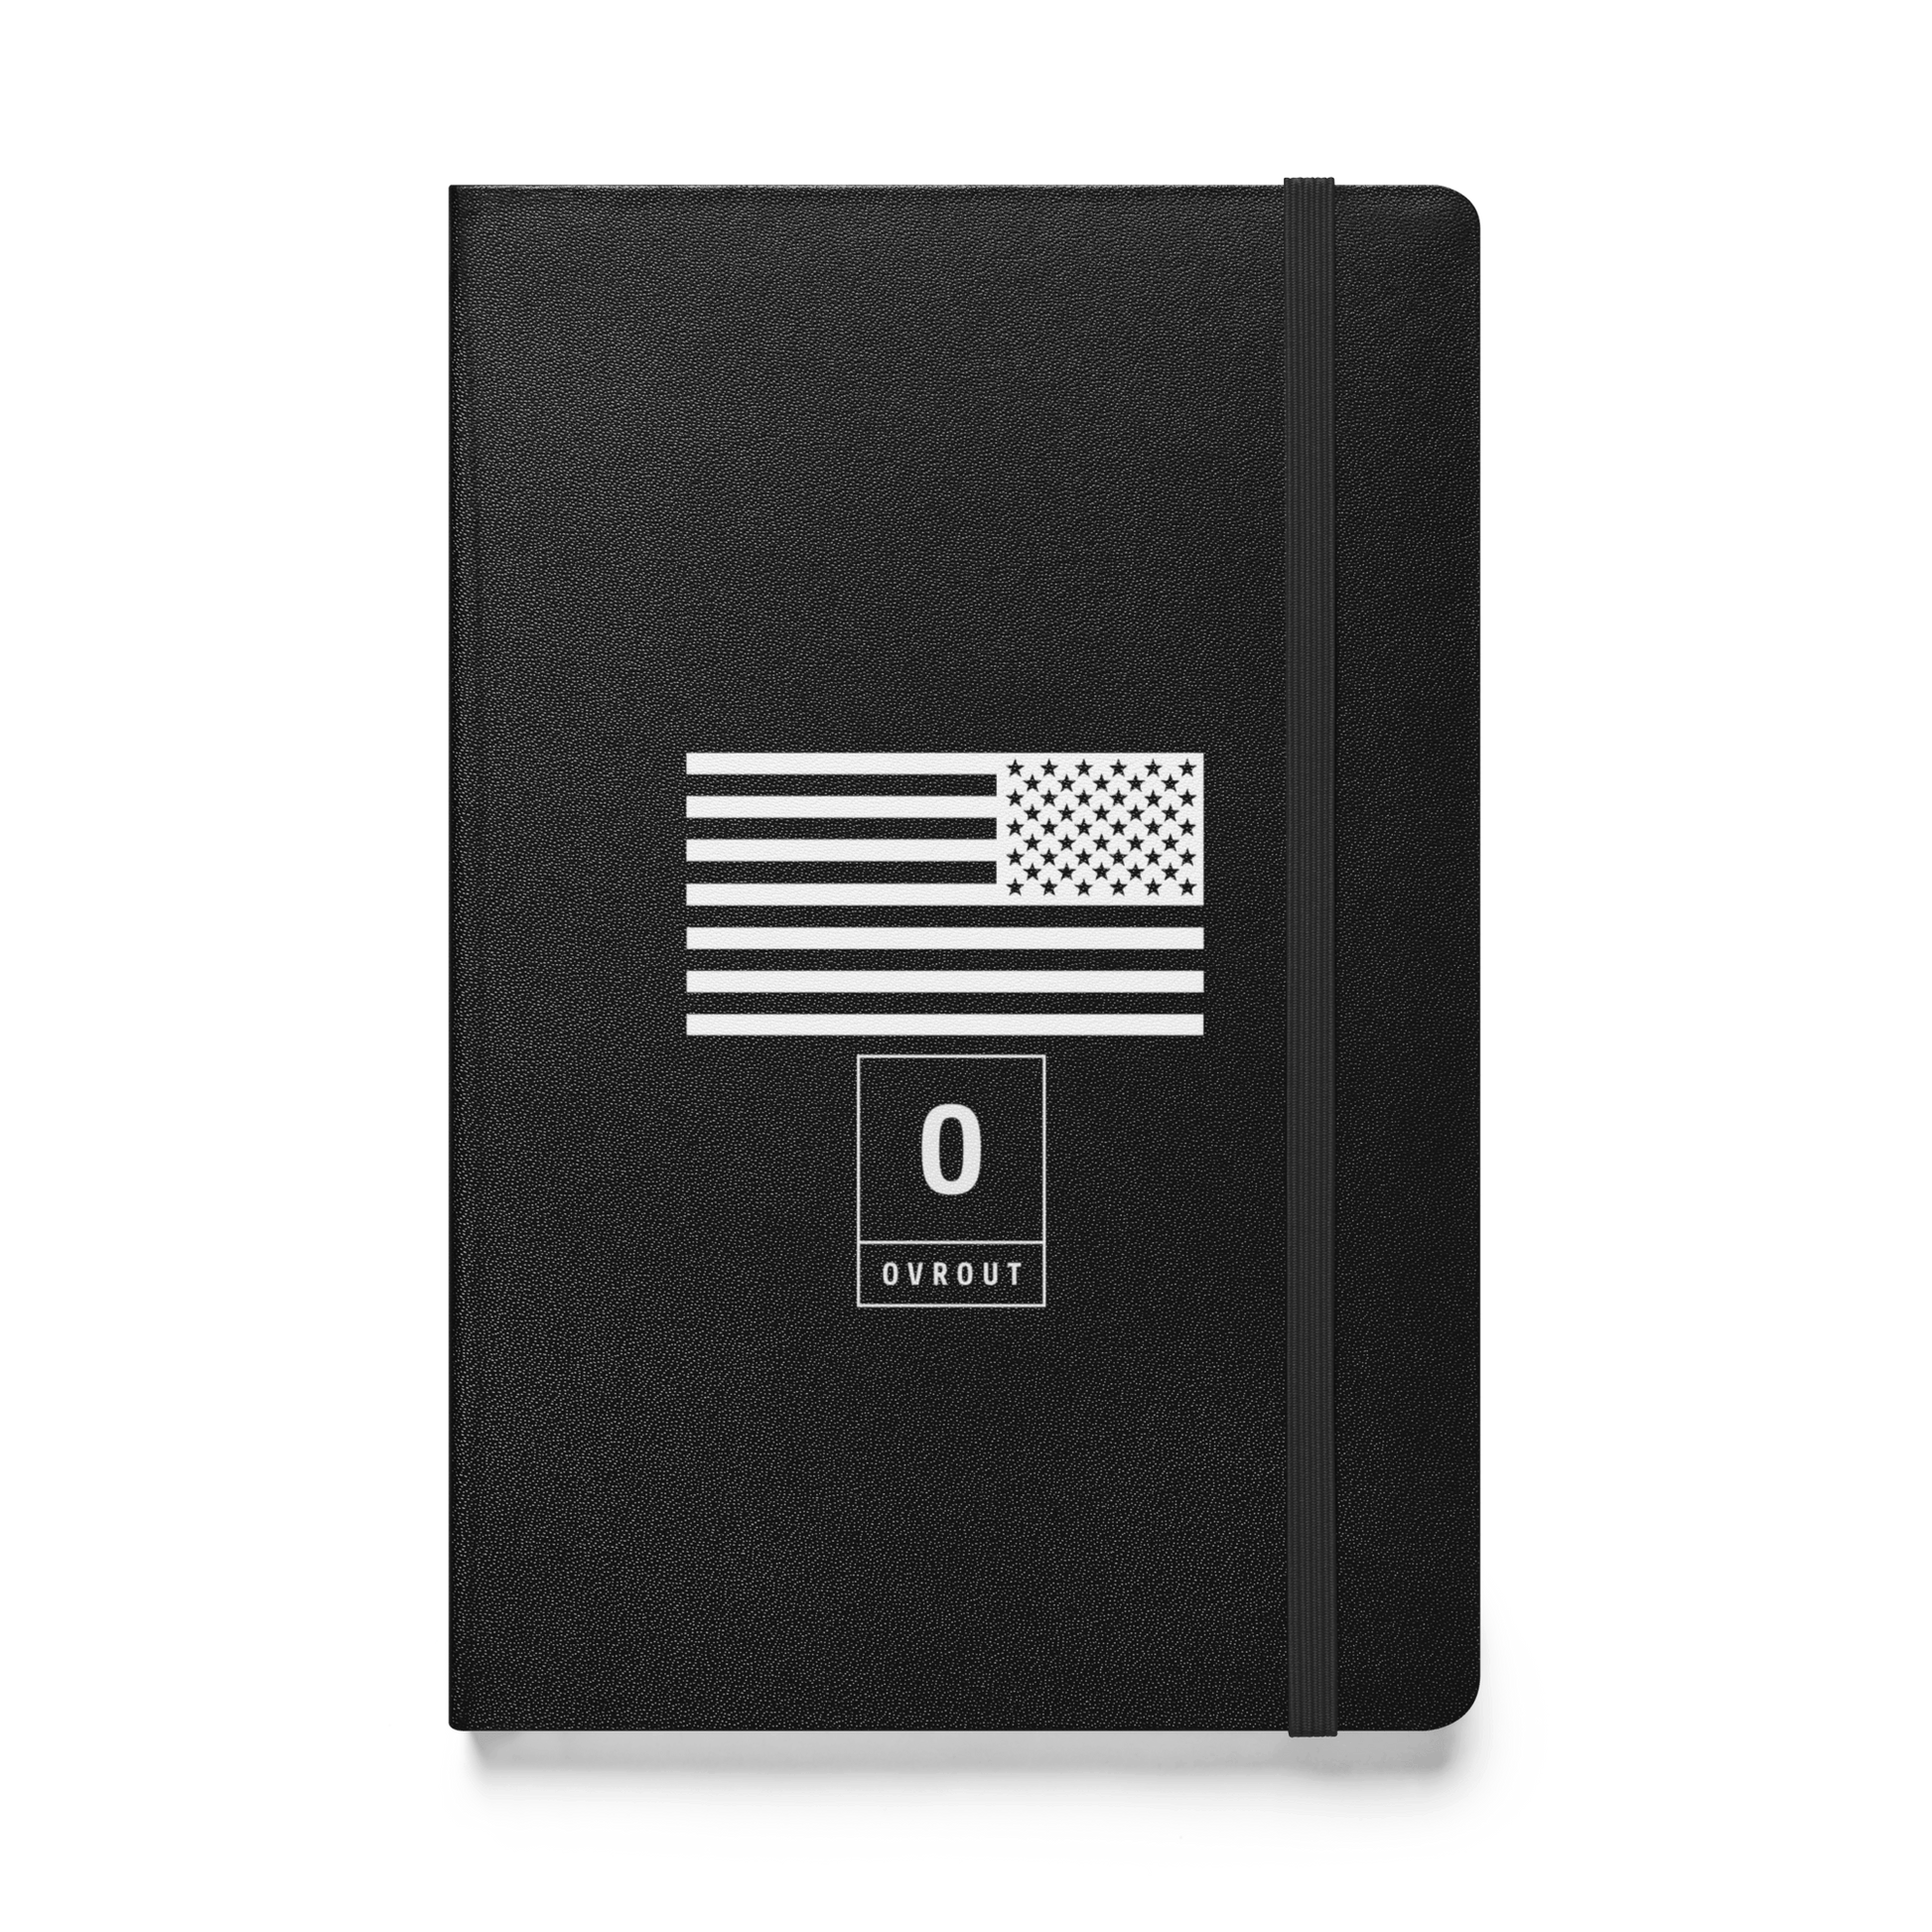 OVROUT Hardcover notebook - OVR & OUT